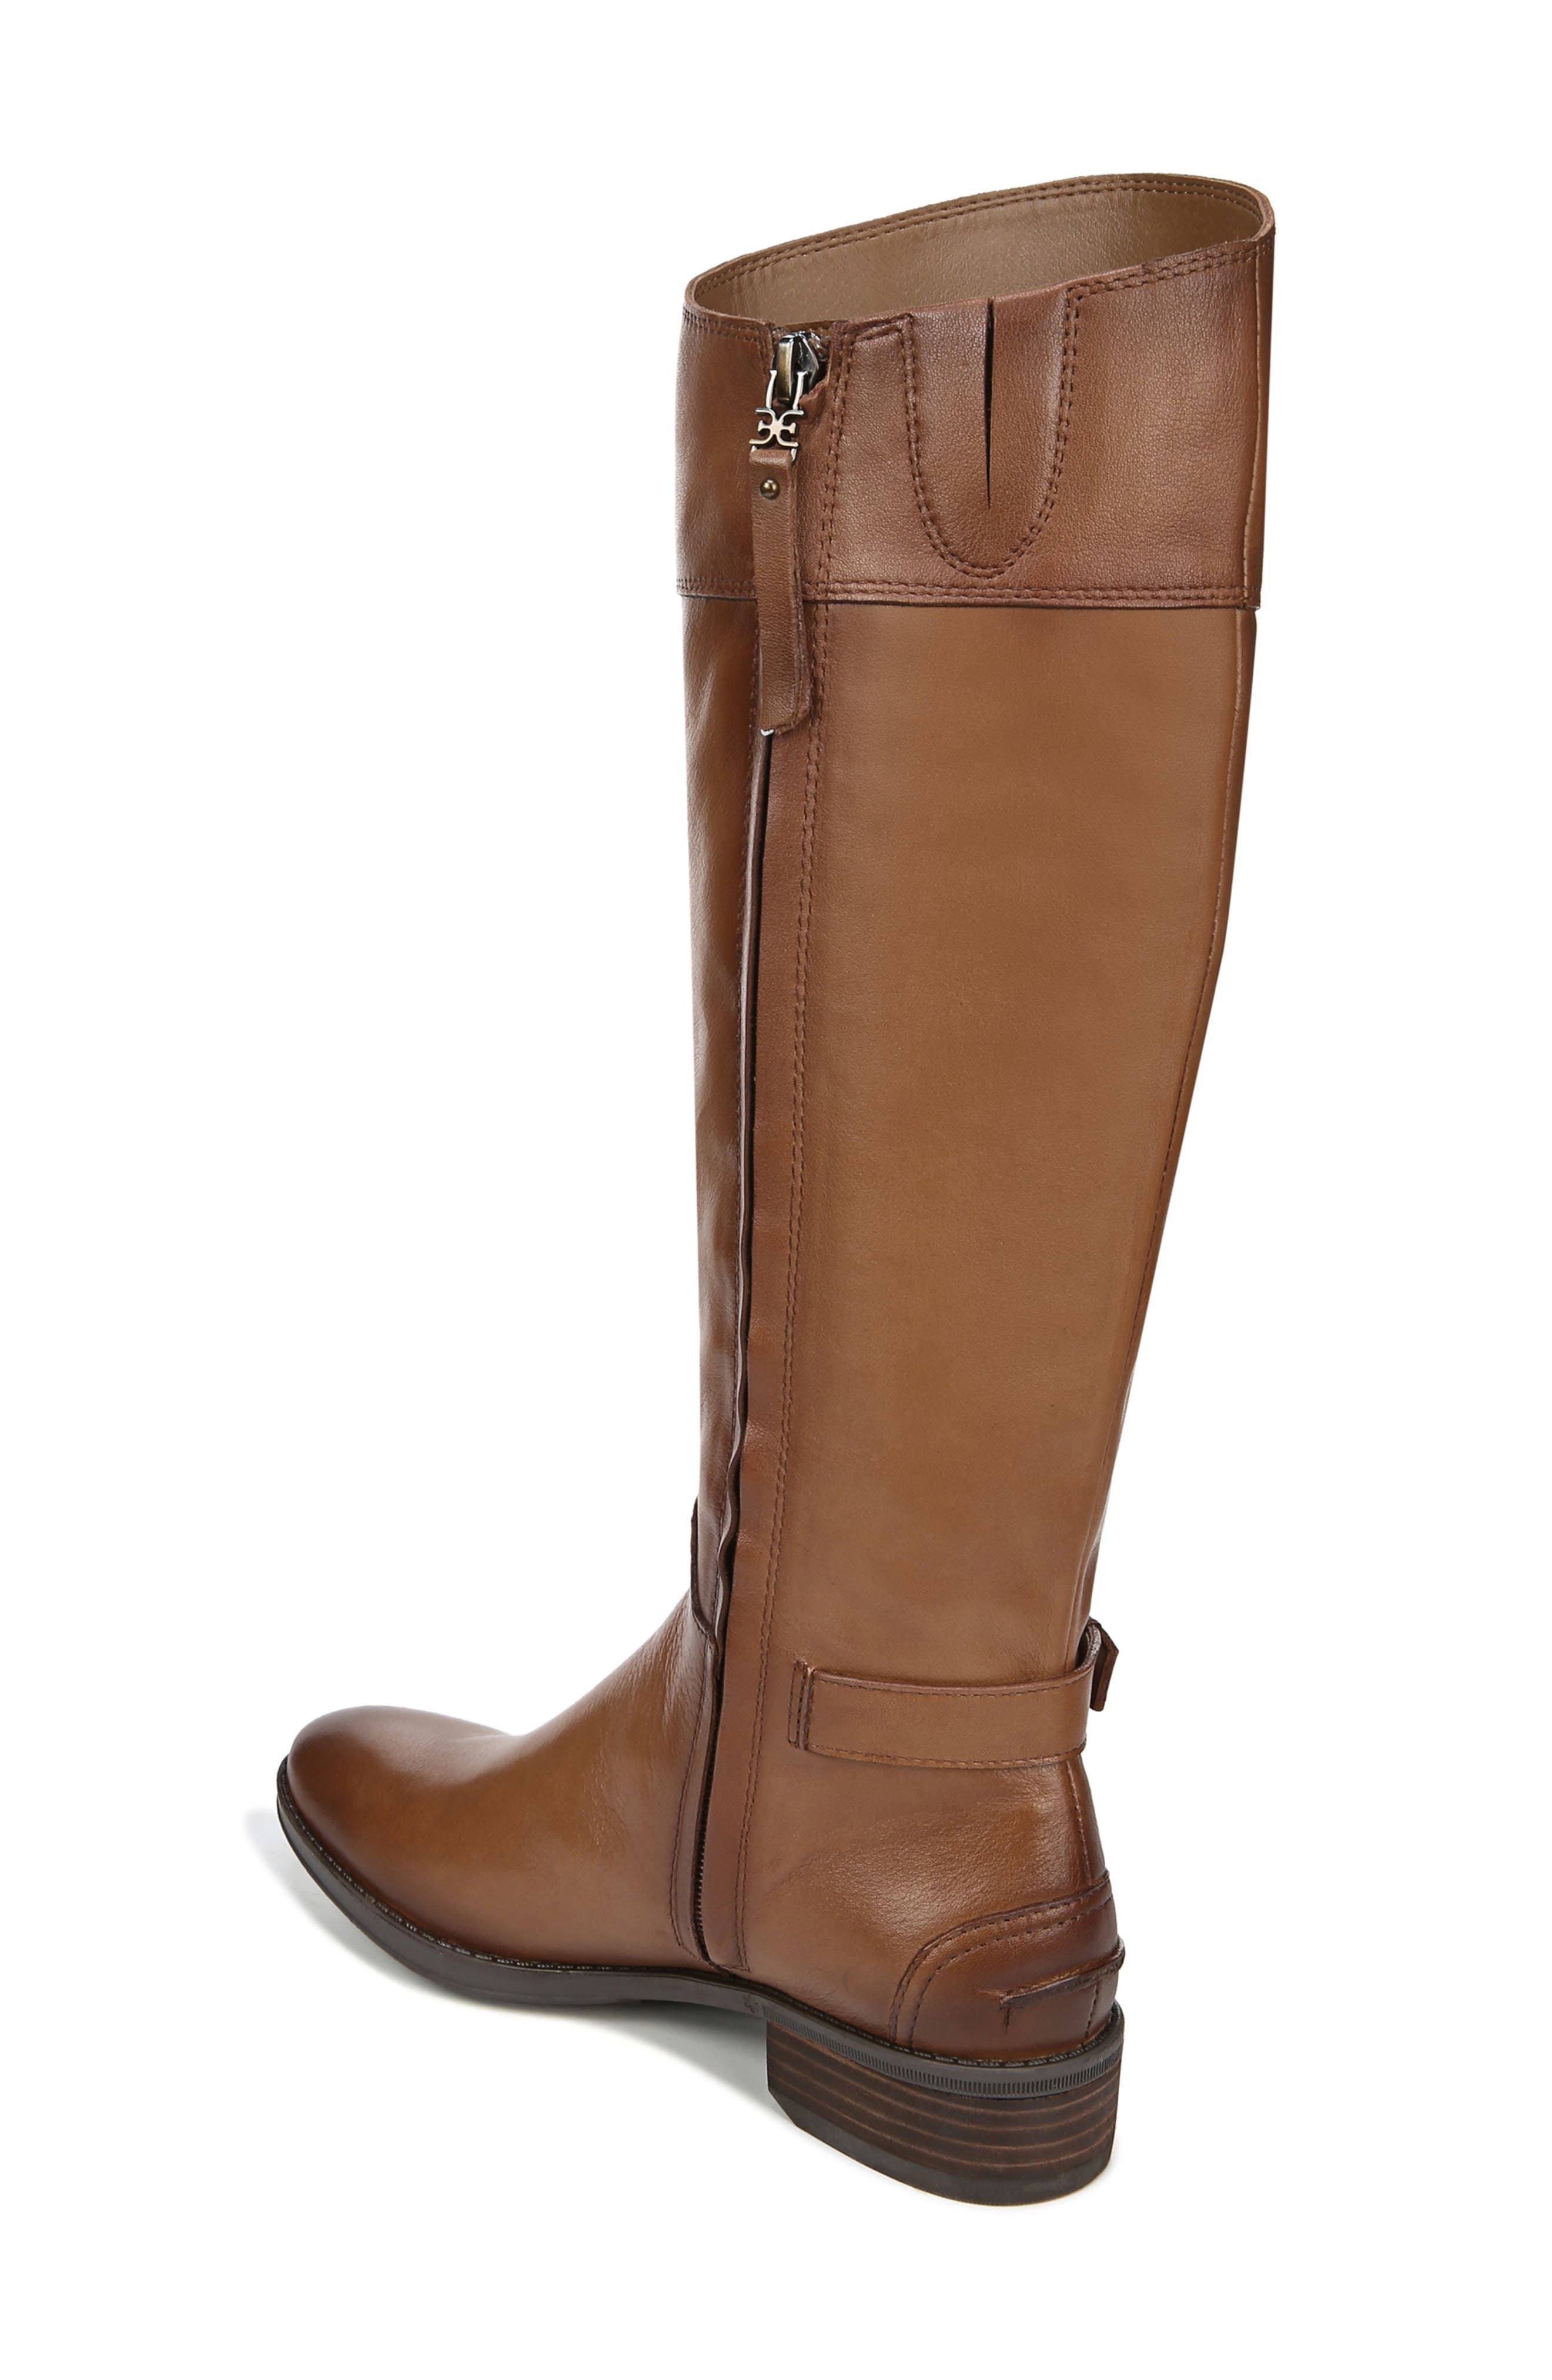 beige riding boots